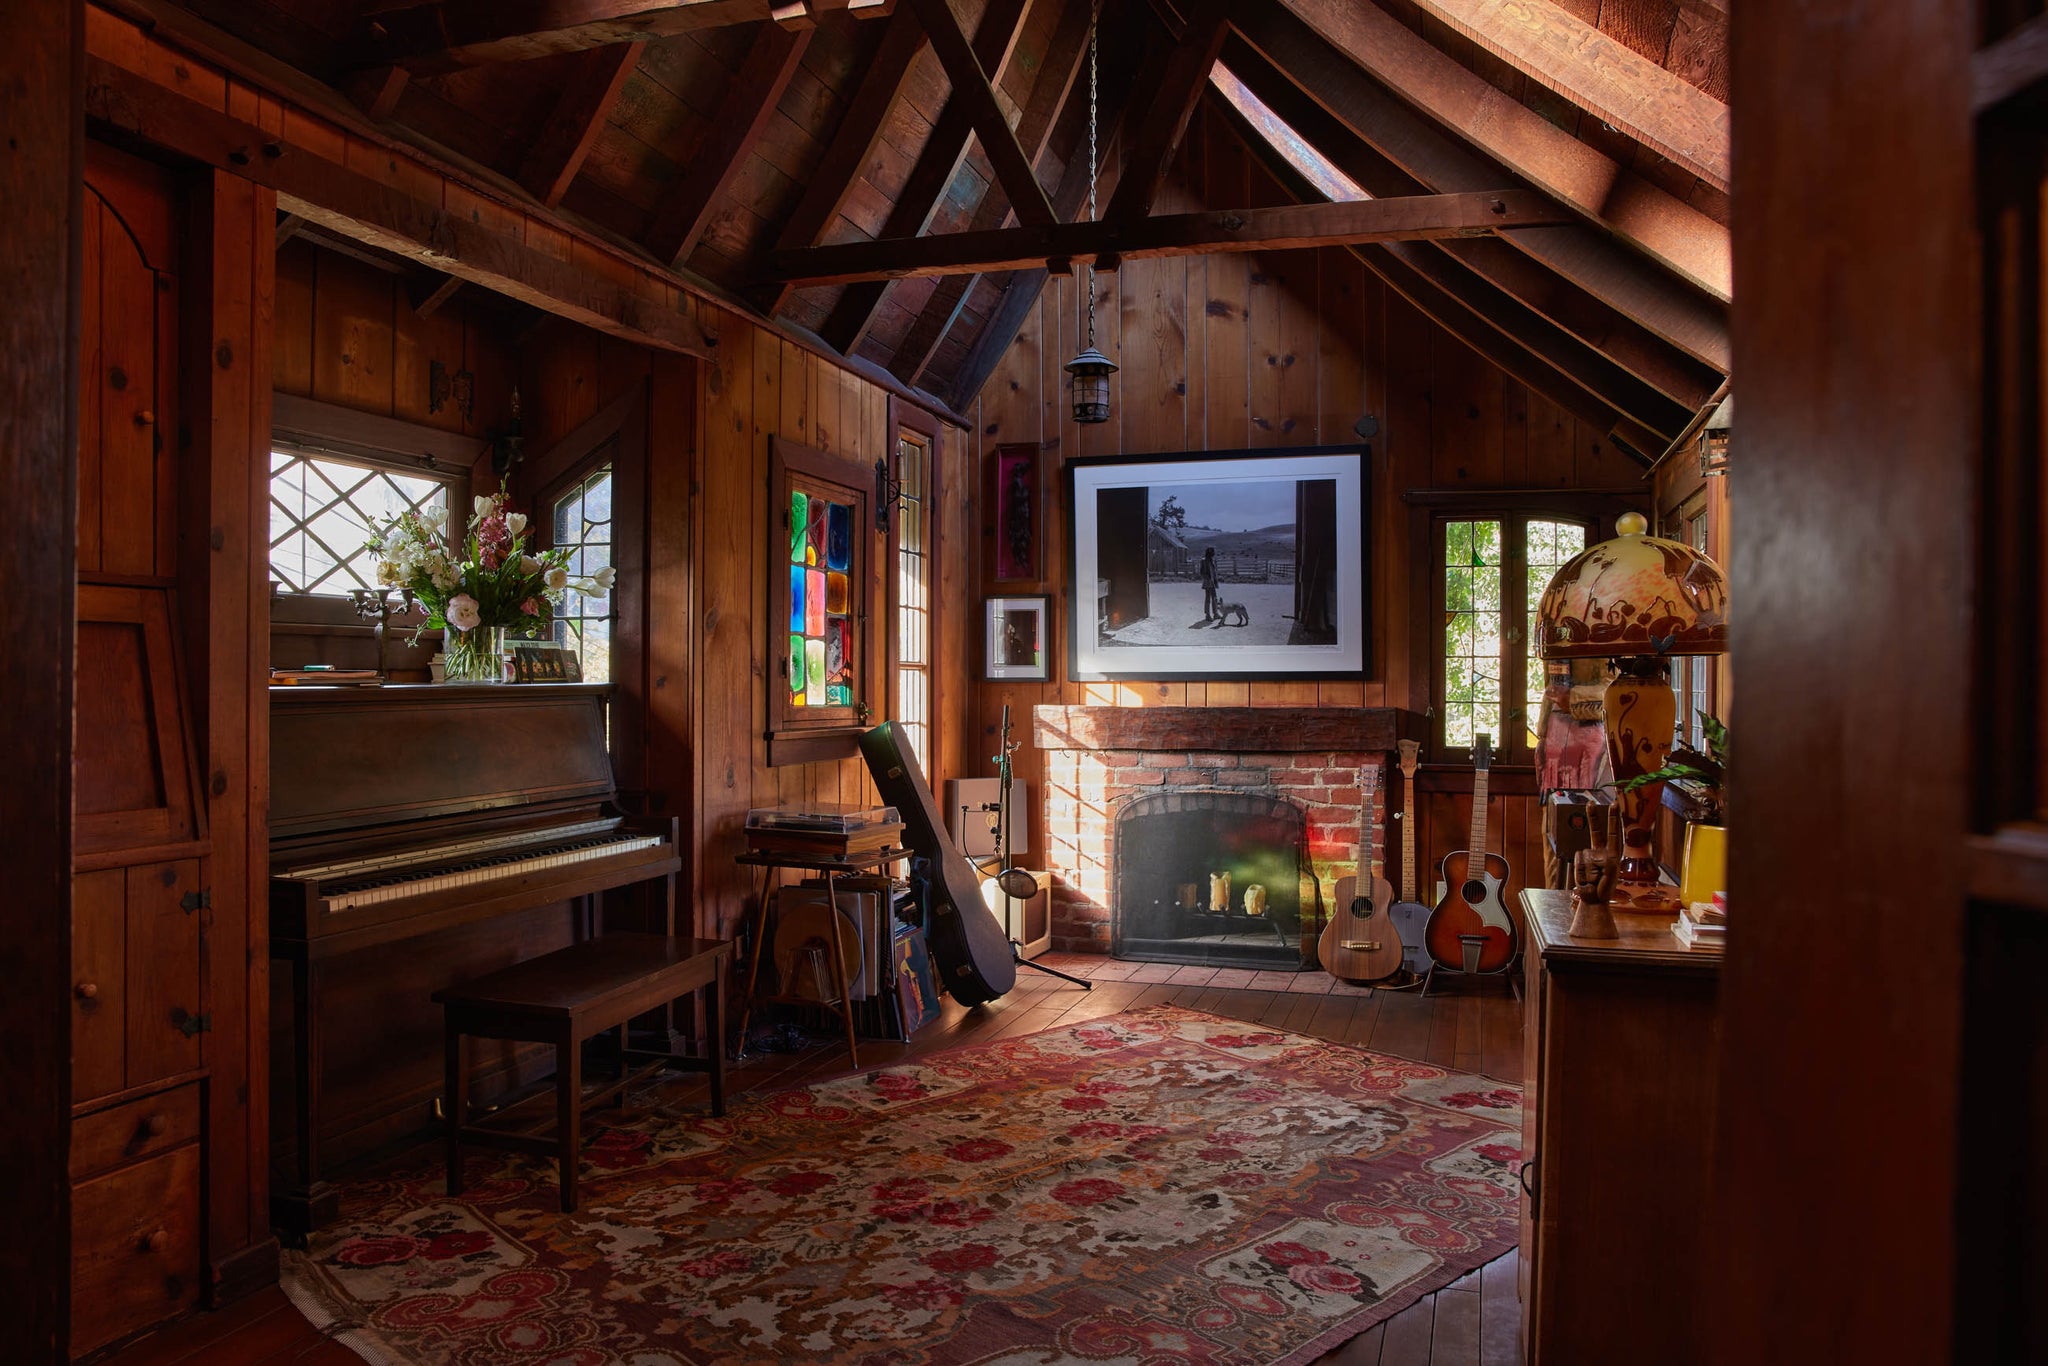 Chase Cohl's music room has a vaulted ceiling and wood paneled walls and ceiling. A piano and four guitars line the room.